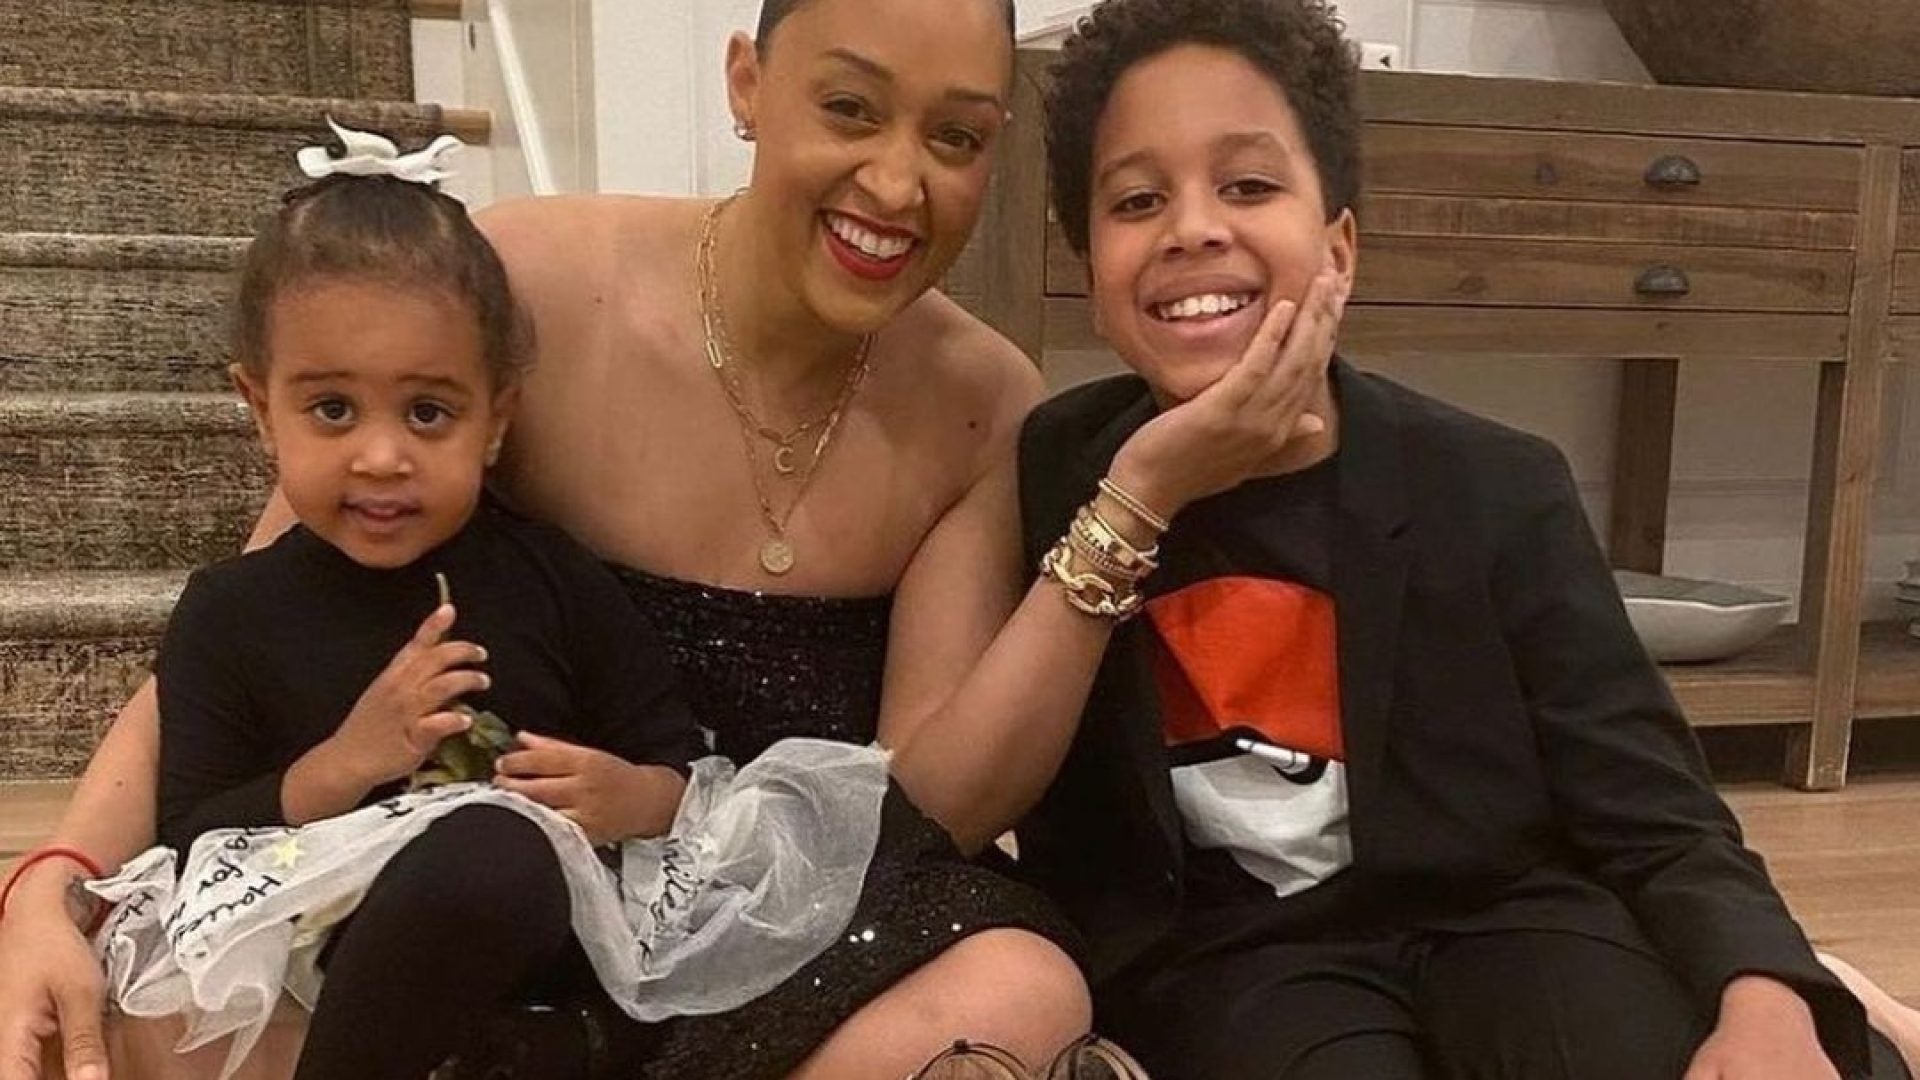 'Pregnancy Wasn't Easy For Me': Tia Mowry Shares How Struggles With Endometriosis Affected Her Journey To Motherhood